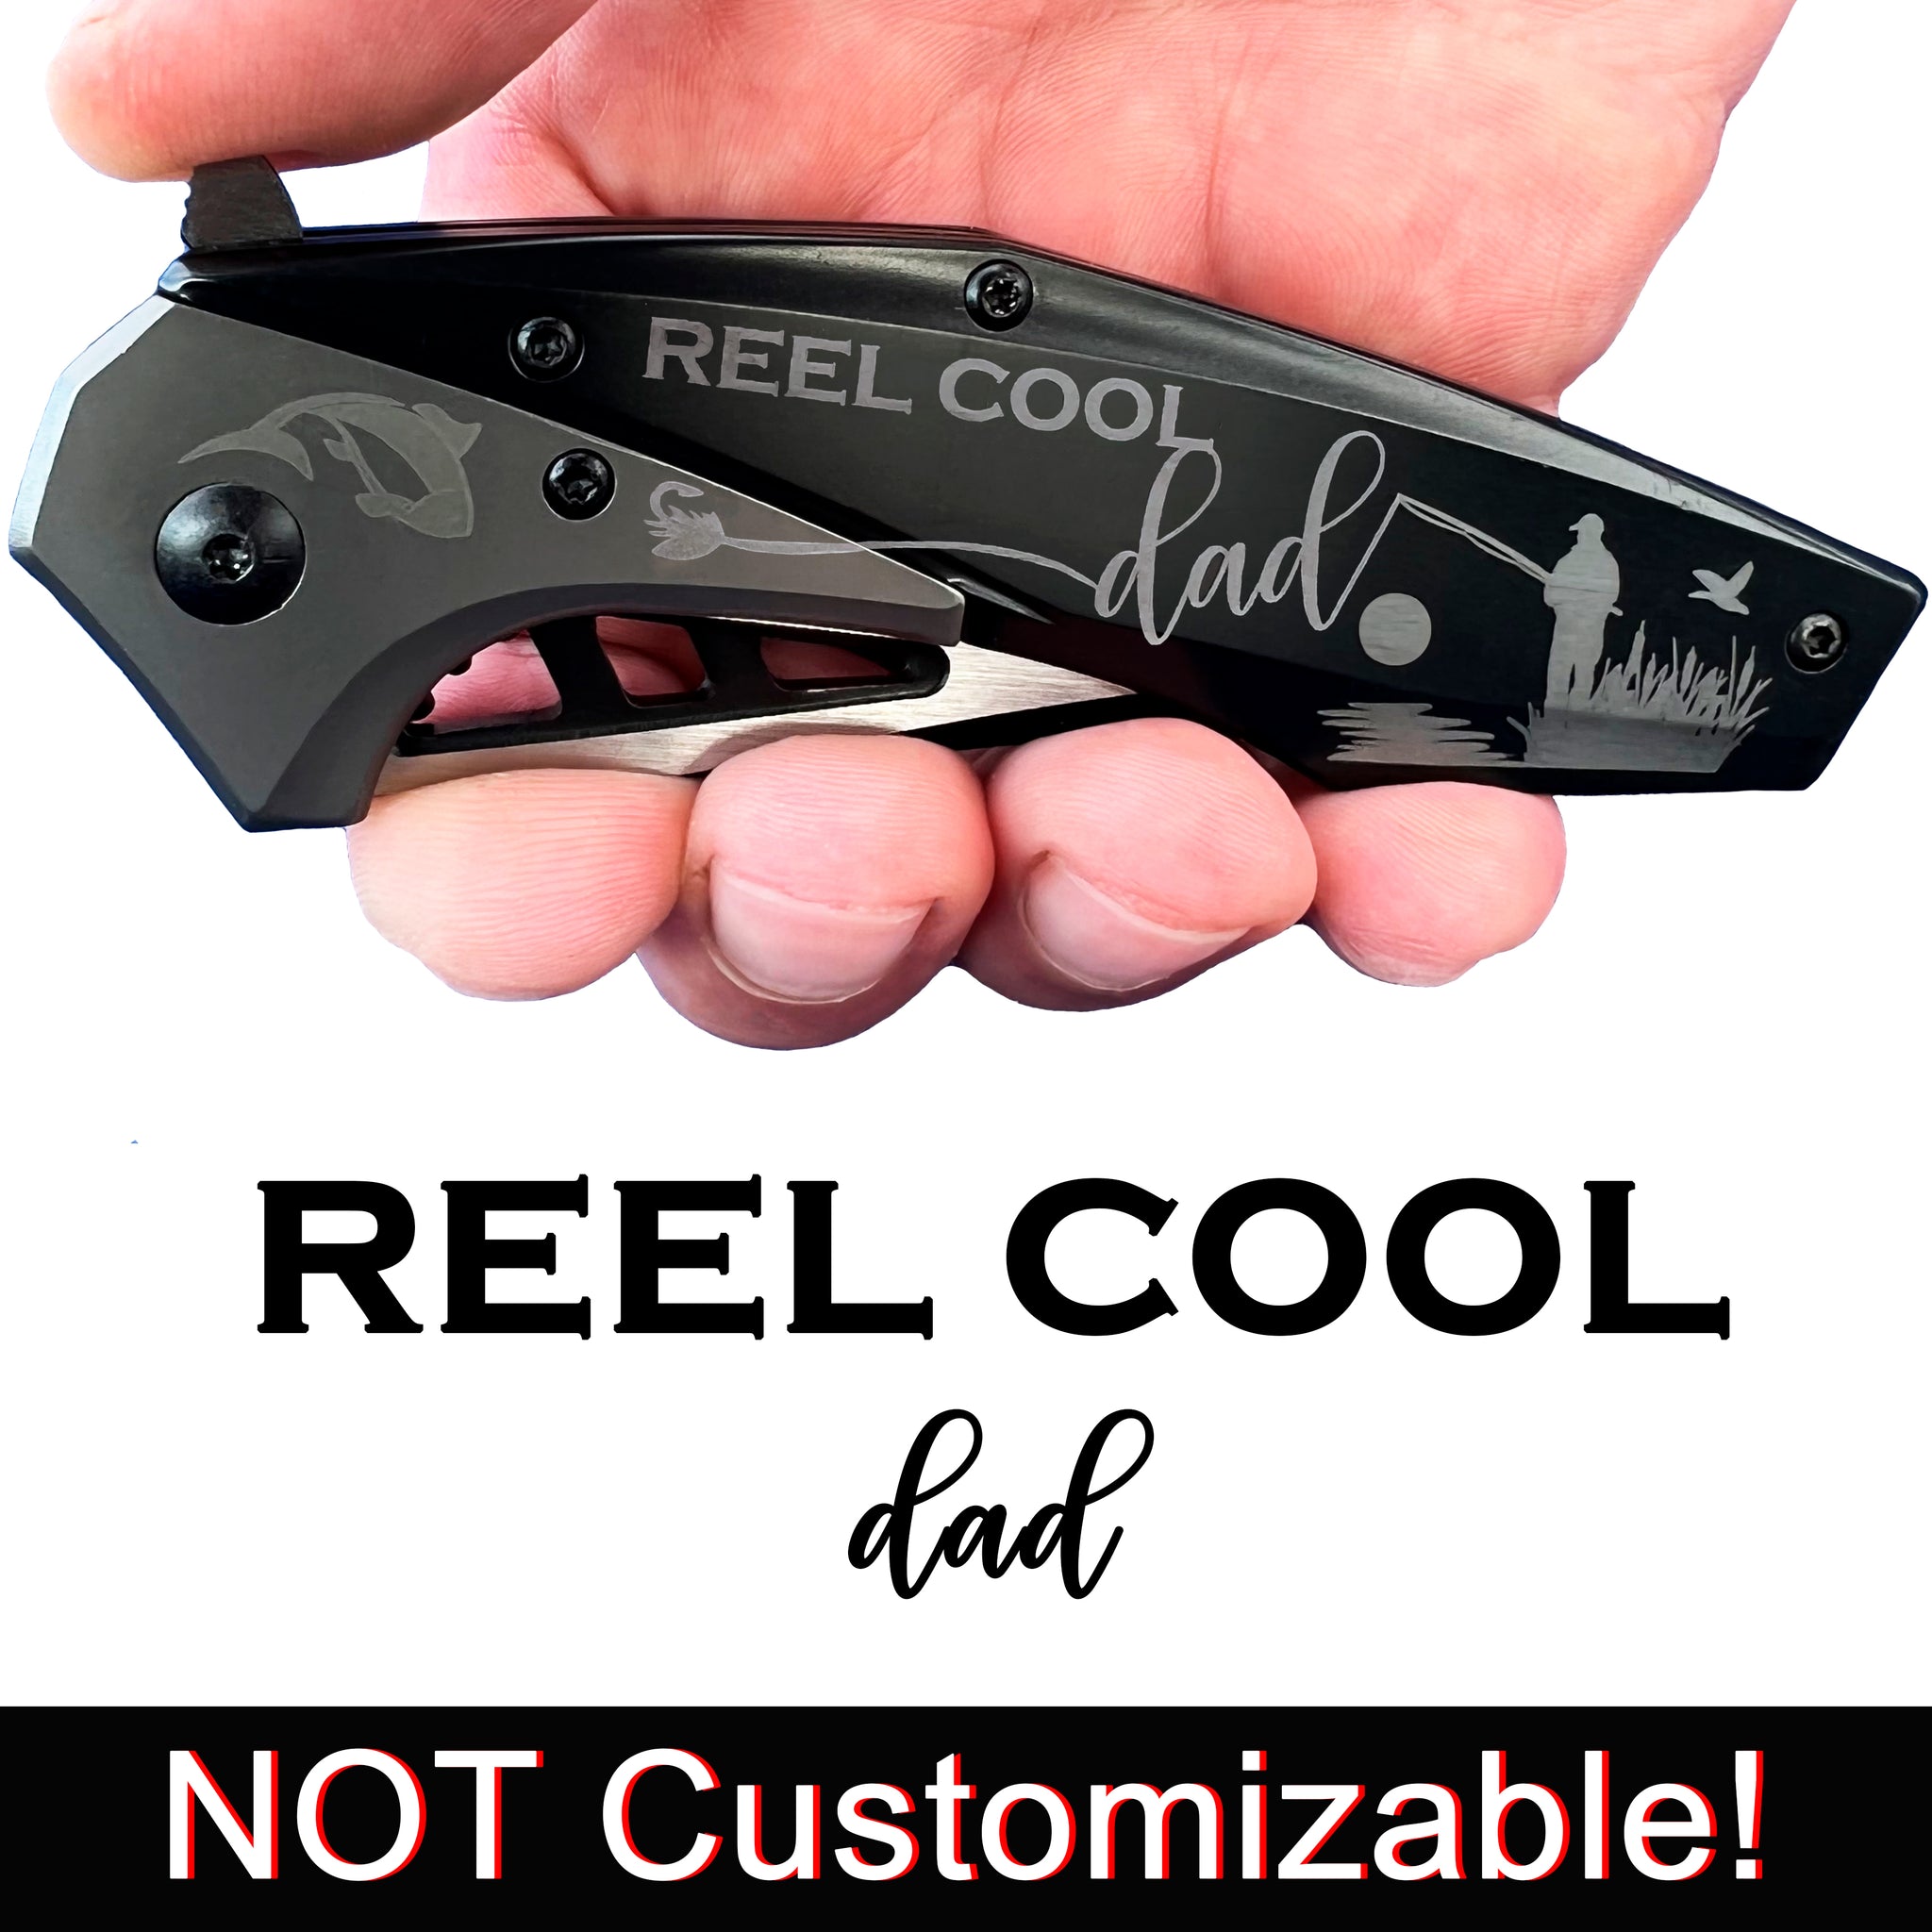  Smoky Tree Reel Cool Dad - Engraved Pocket Fishing Knife for  Father who loves Fishing - Gift for Fishing Dad - Fisherman Daddy - Funny  Gift Idea for Christmas, Father's